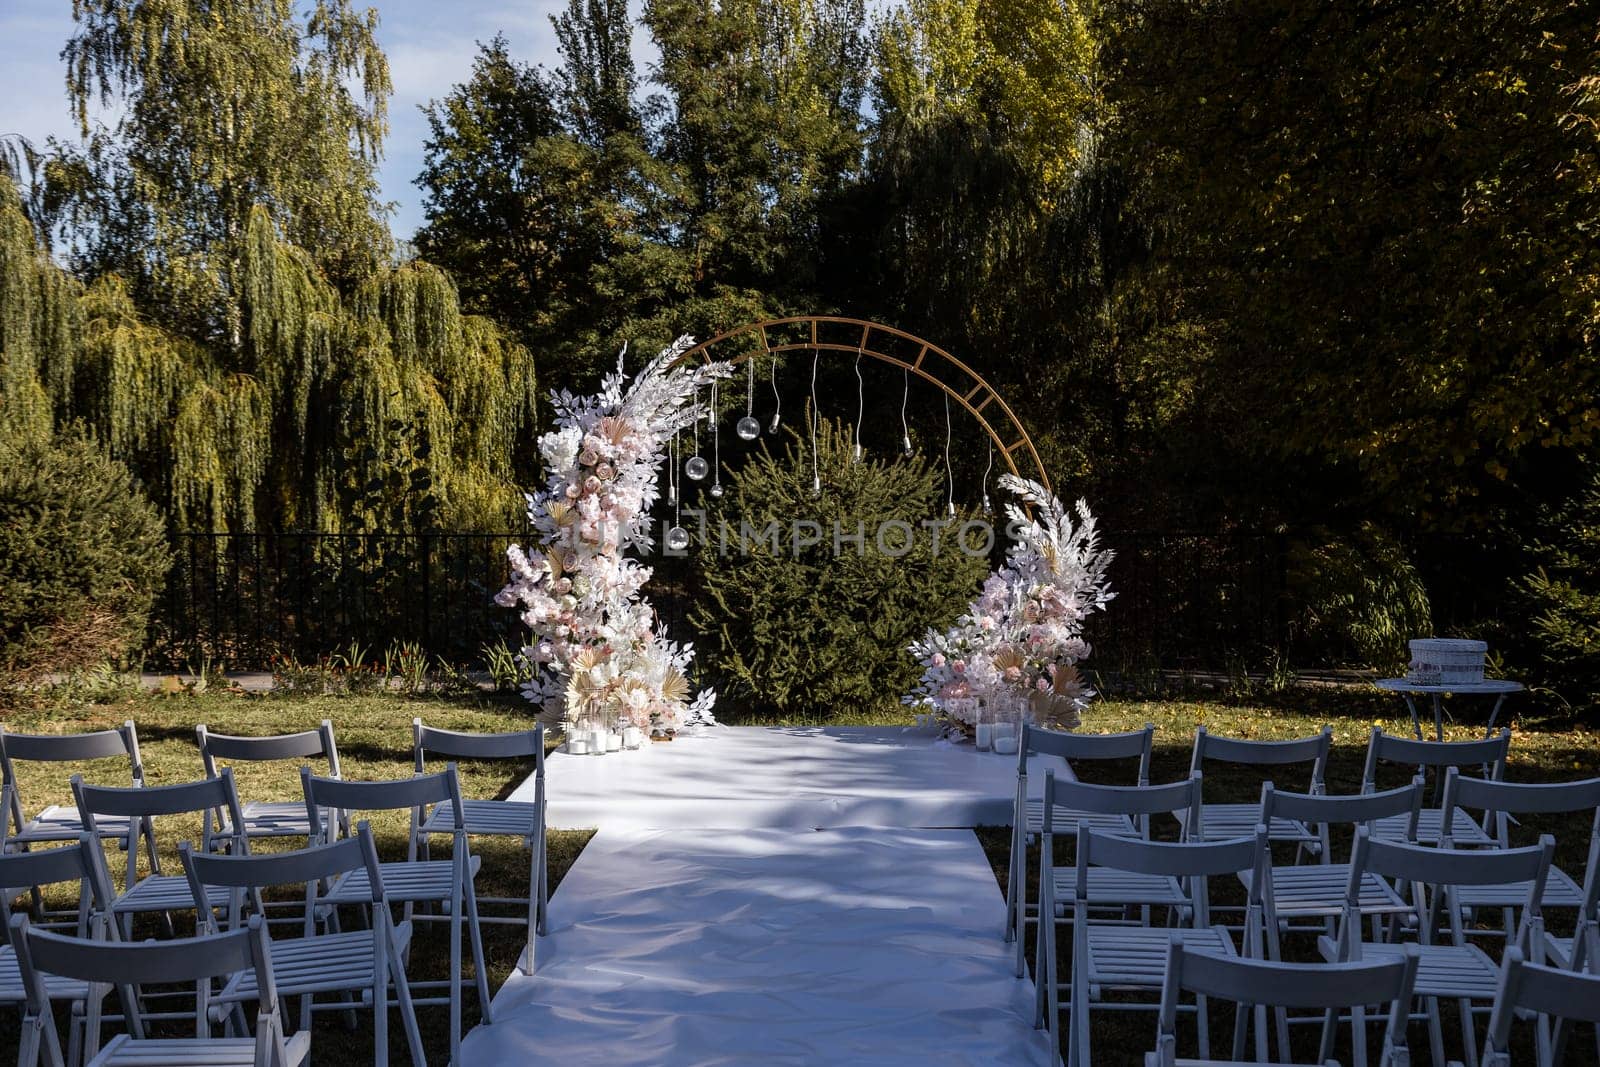 Festive arch for the ceremony of painting the newlyweds on the wedding day, wedding decor with fresh flowers by Dmitrytph